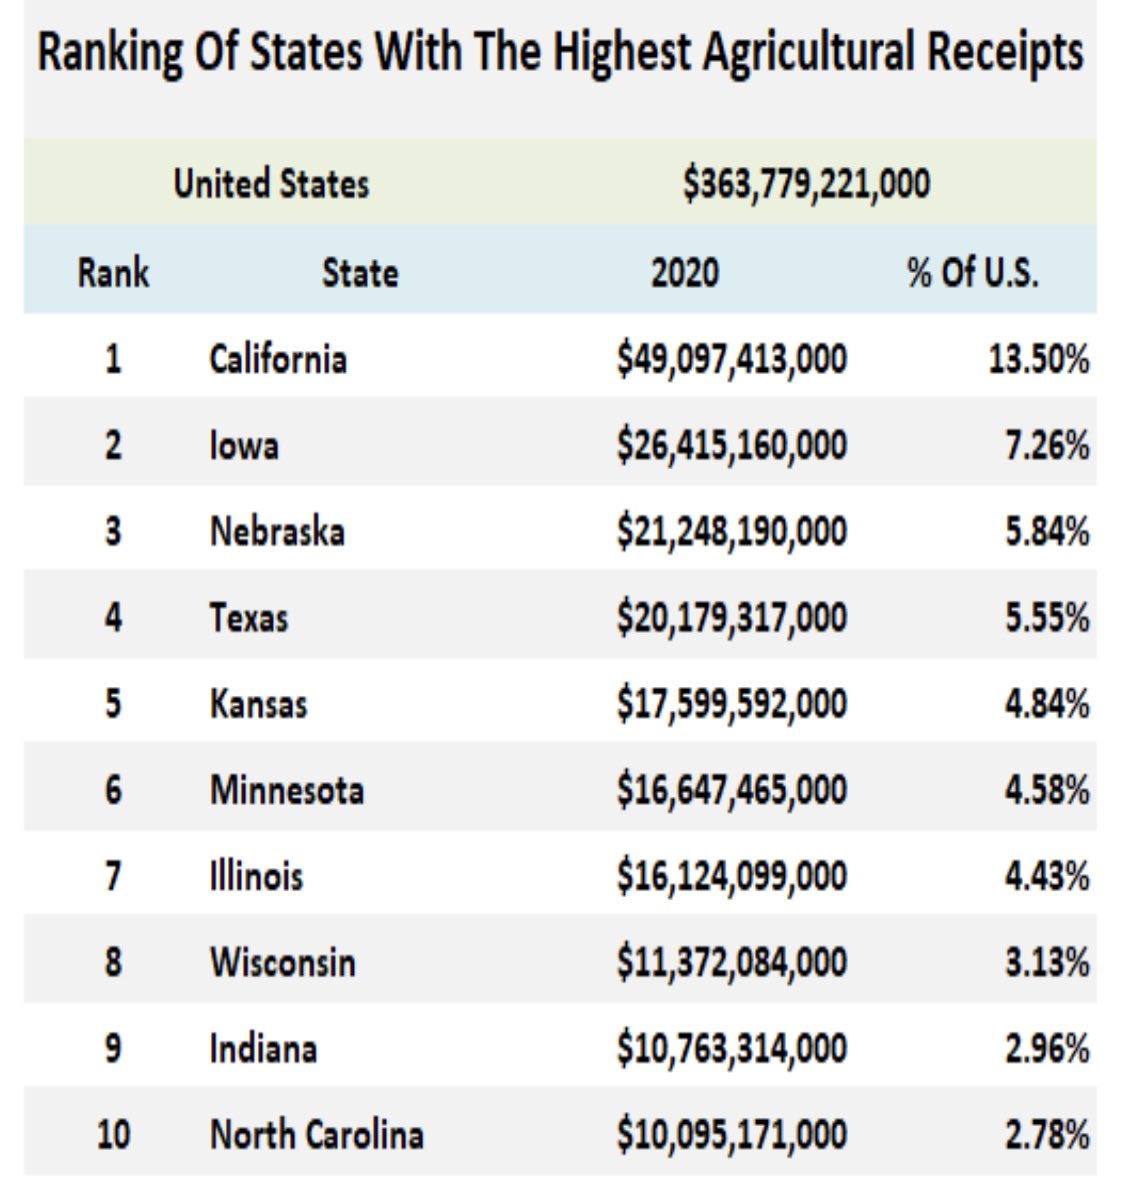 Way to use numbers from a year half the state was flattened by a Derecho

Despite being 40% smaller than Kansas, Iowa produces $9,000,000,000 more worth of food and is second only to a state 3 times their size https://t.co/jxZeXGSR0Z https://t.co/svfrOoRzqJ